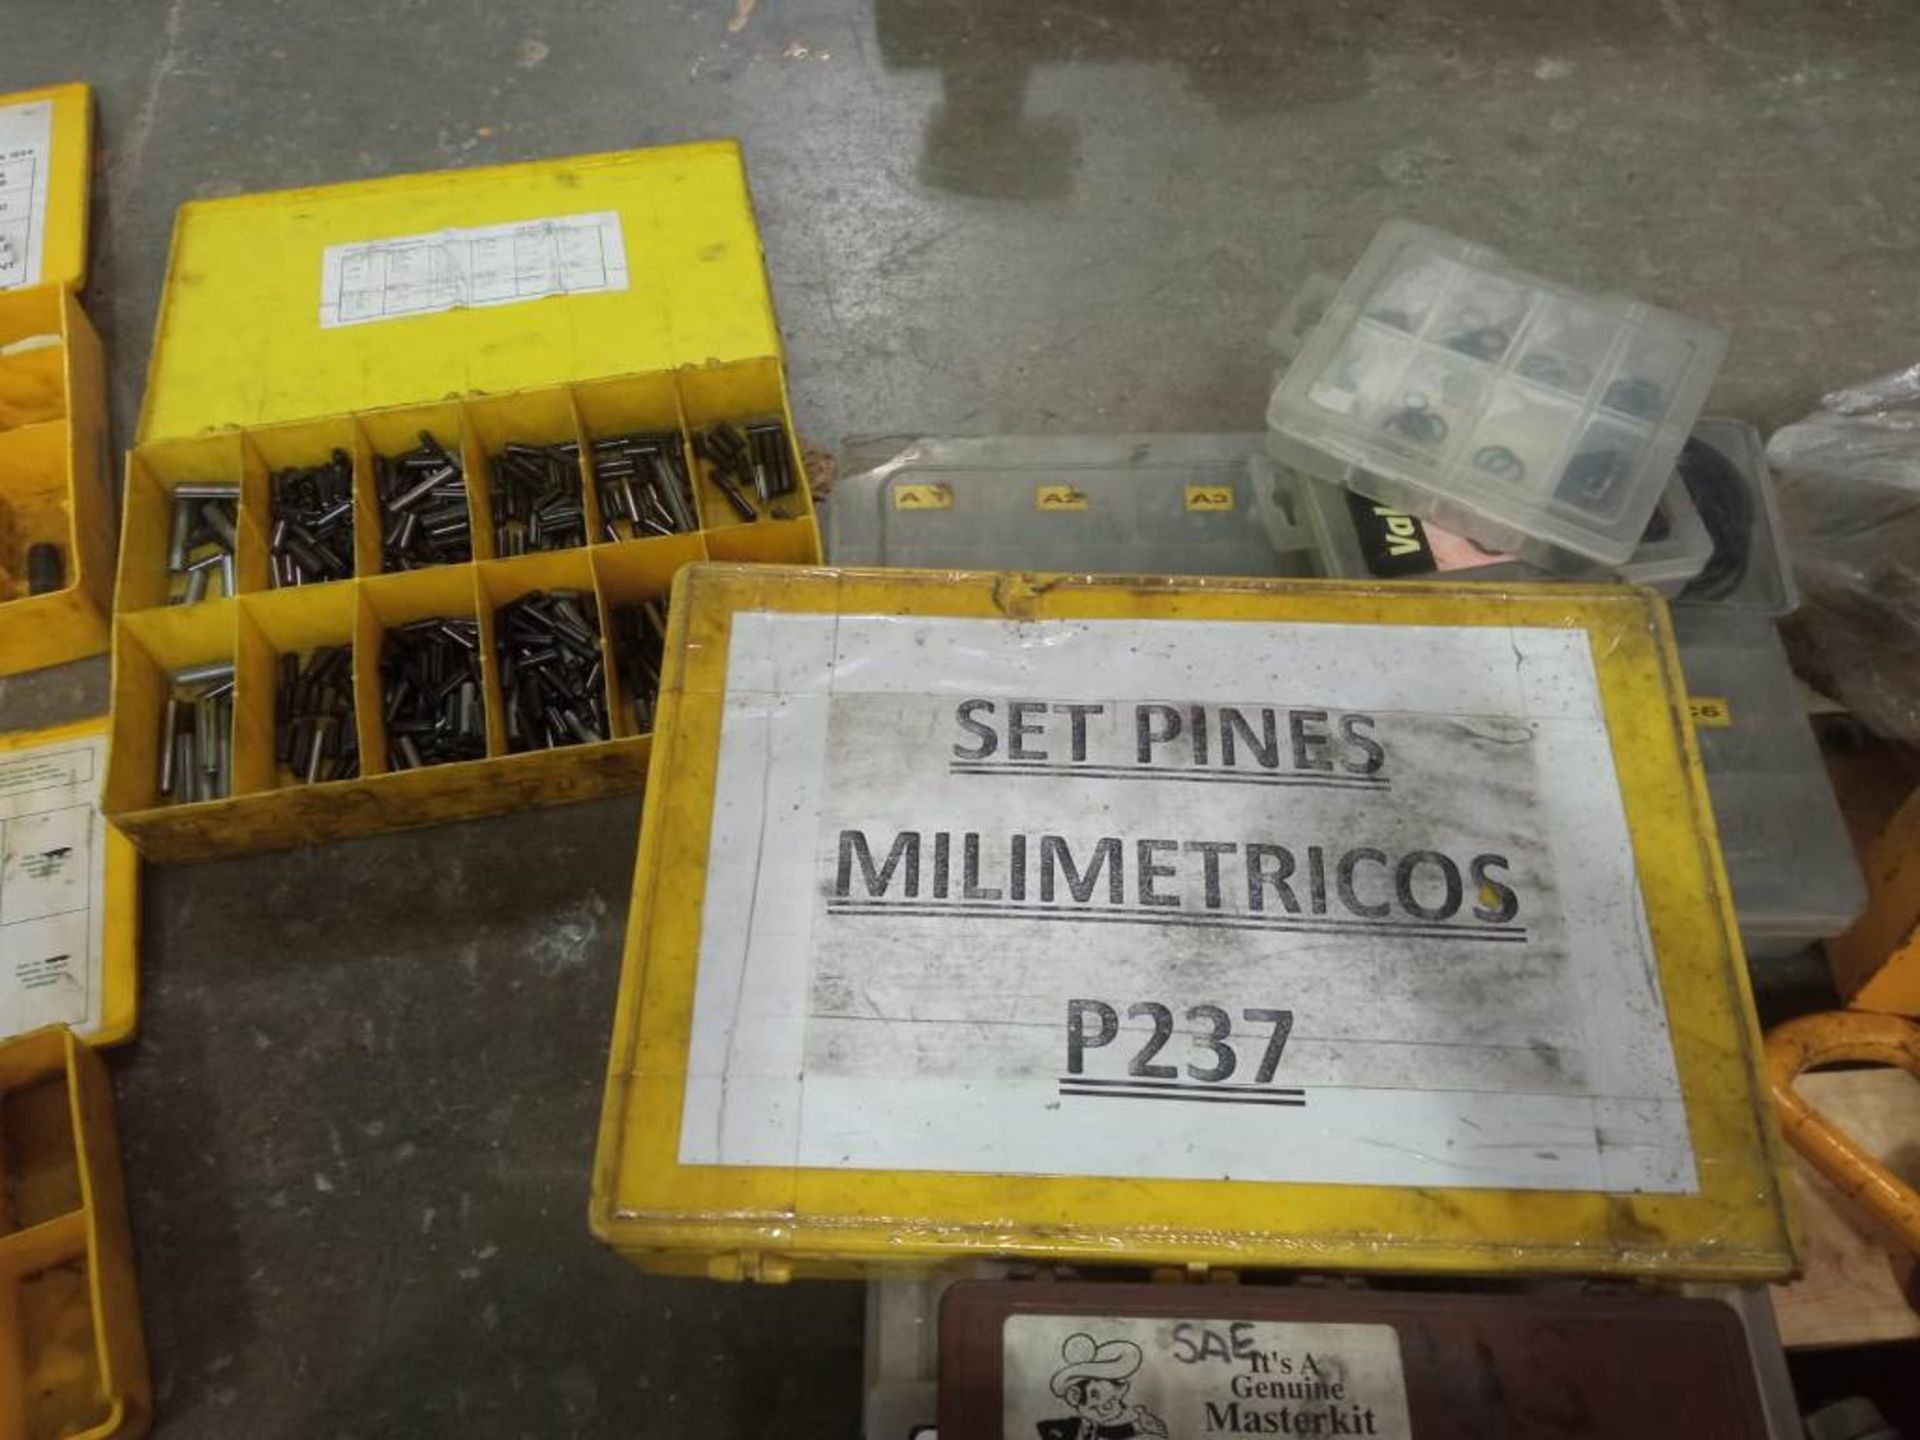 Lot of diverse parts contains: Screws, starters, forklift pads, electrocos, staples, gaskets, pneum - Image 9 of 11